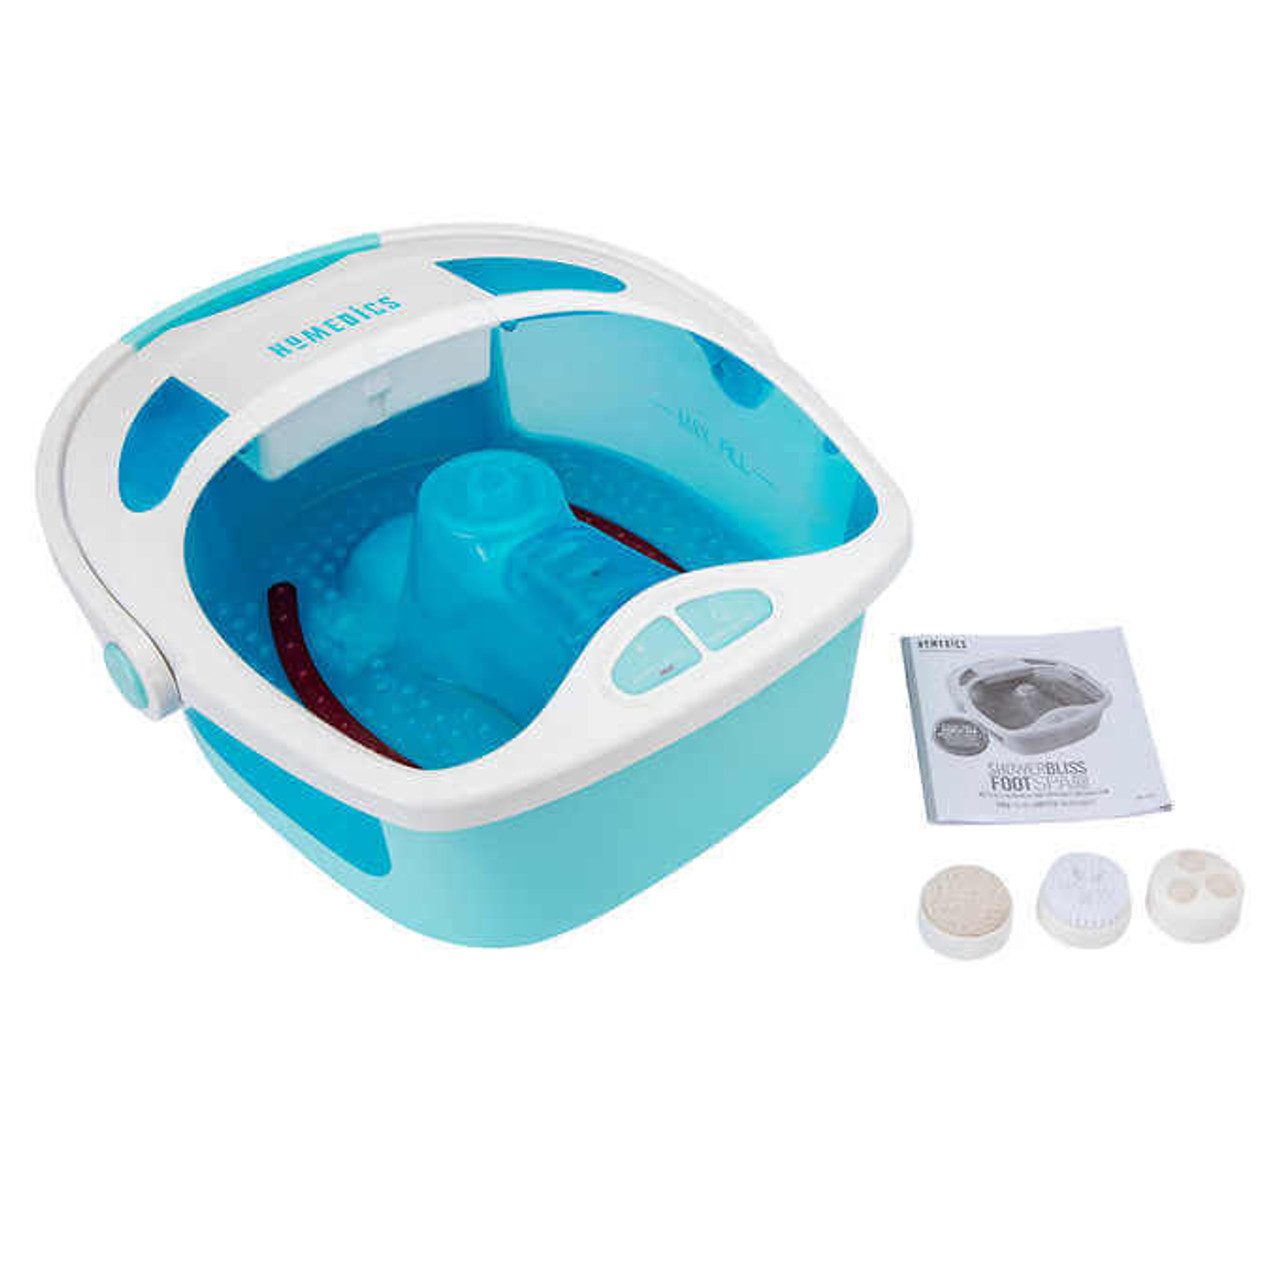 HoMedics Shower Bliss Foot Relaxation Spa Bundle(8/CASE)-Chicken Pieces